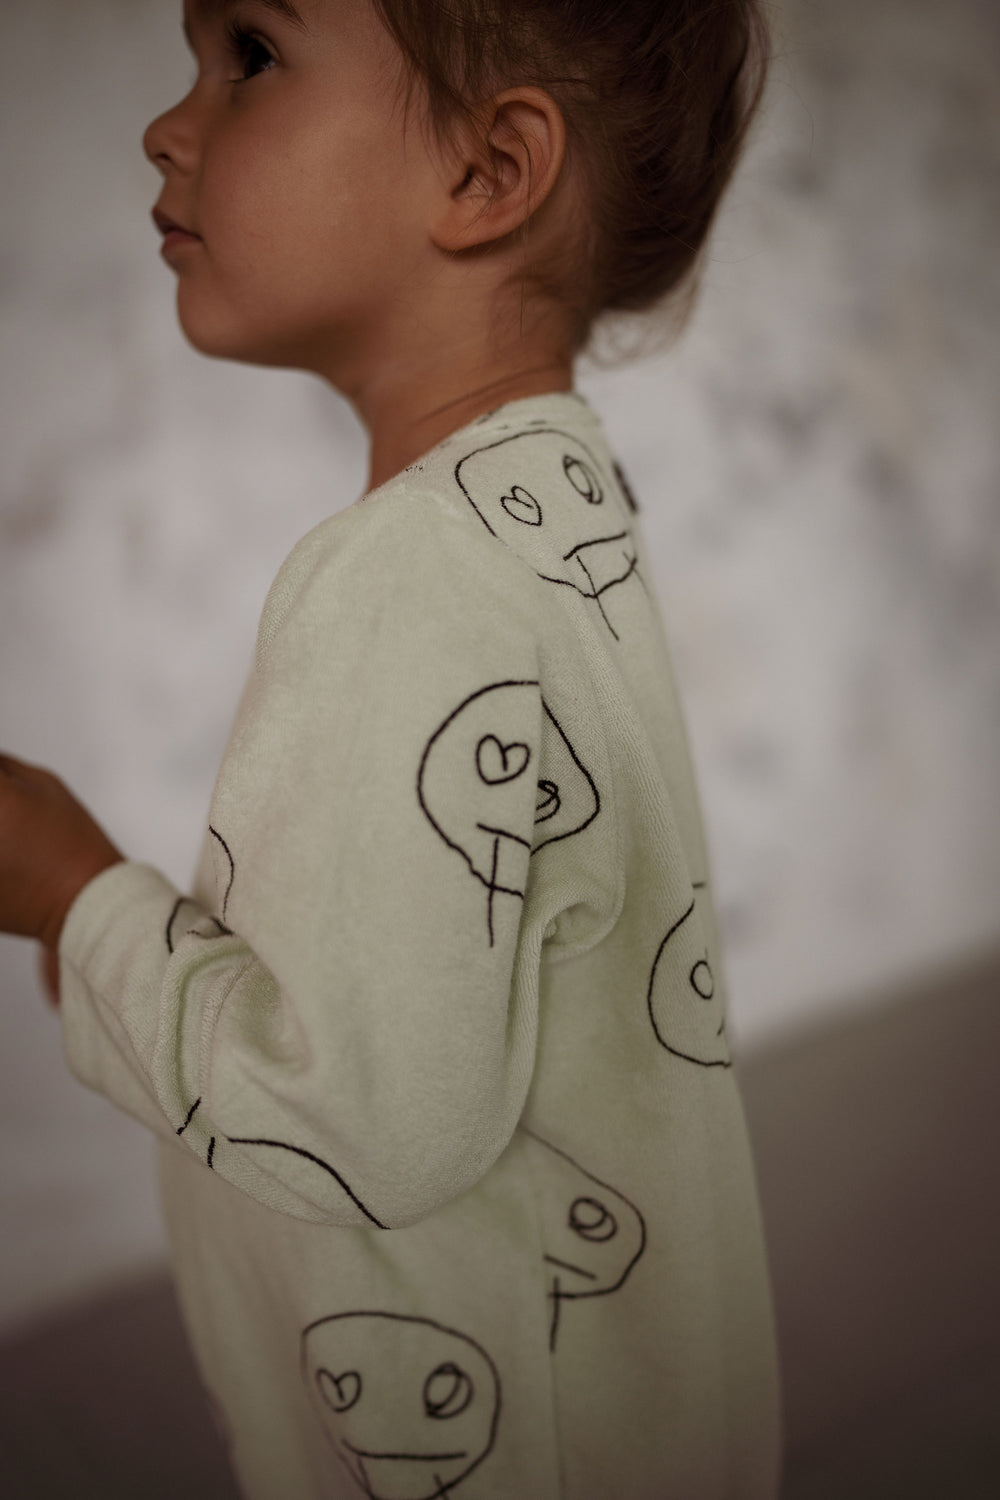 Another Fox- Modern gender neutral Clothing for kids, baby & grown